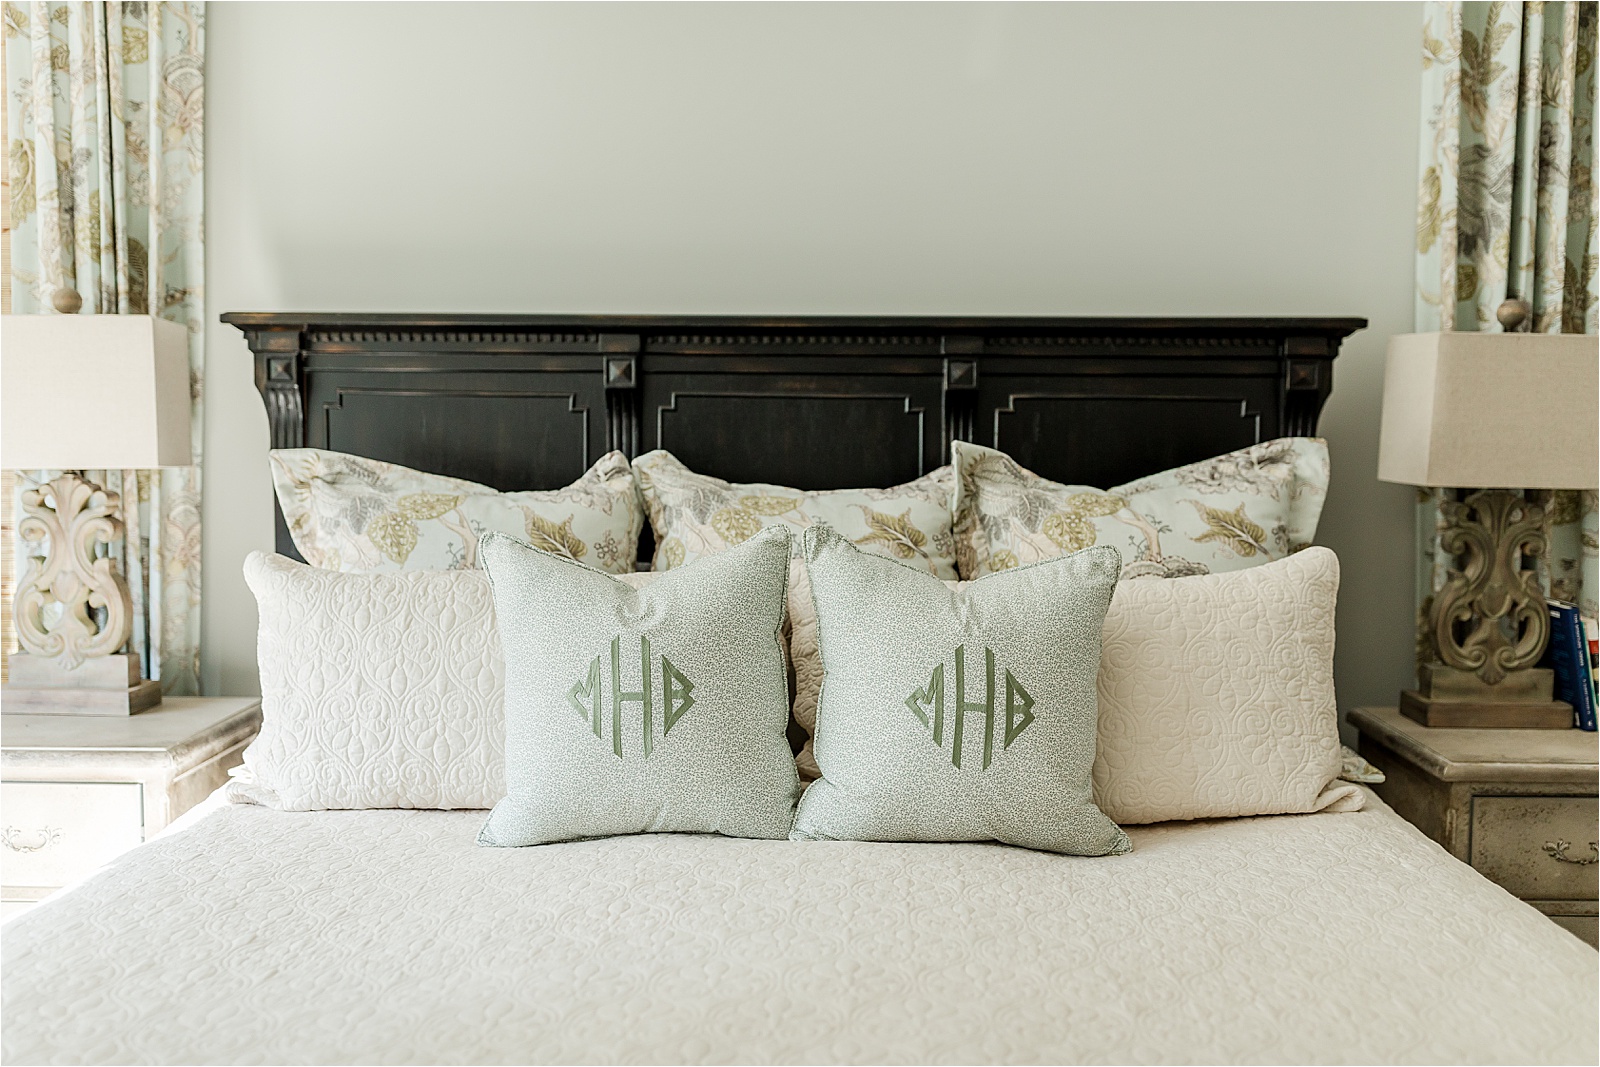 Green and tan bedding on a king size bed with monogrammed pillows